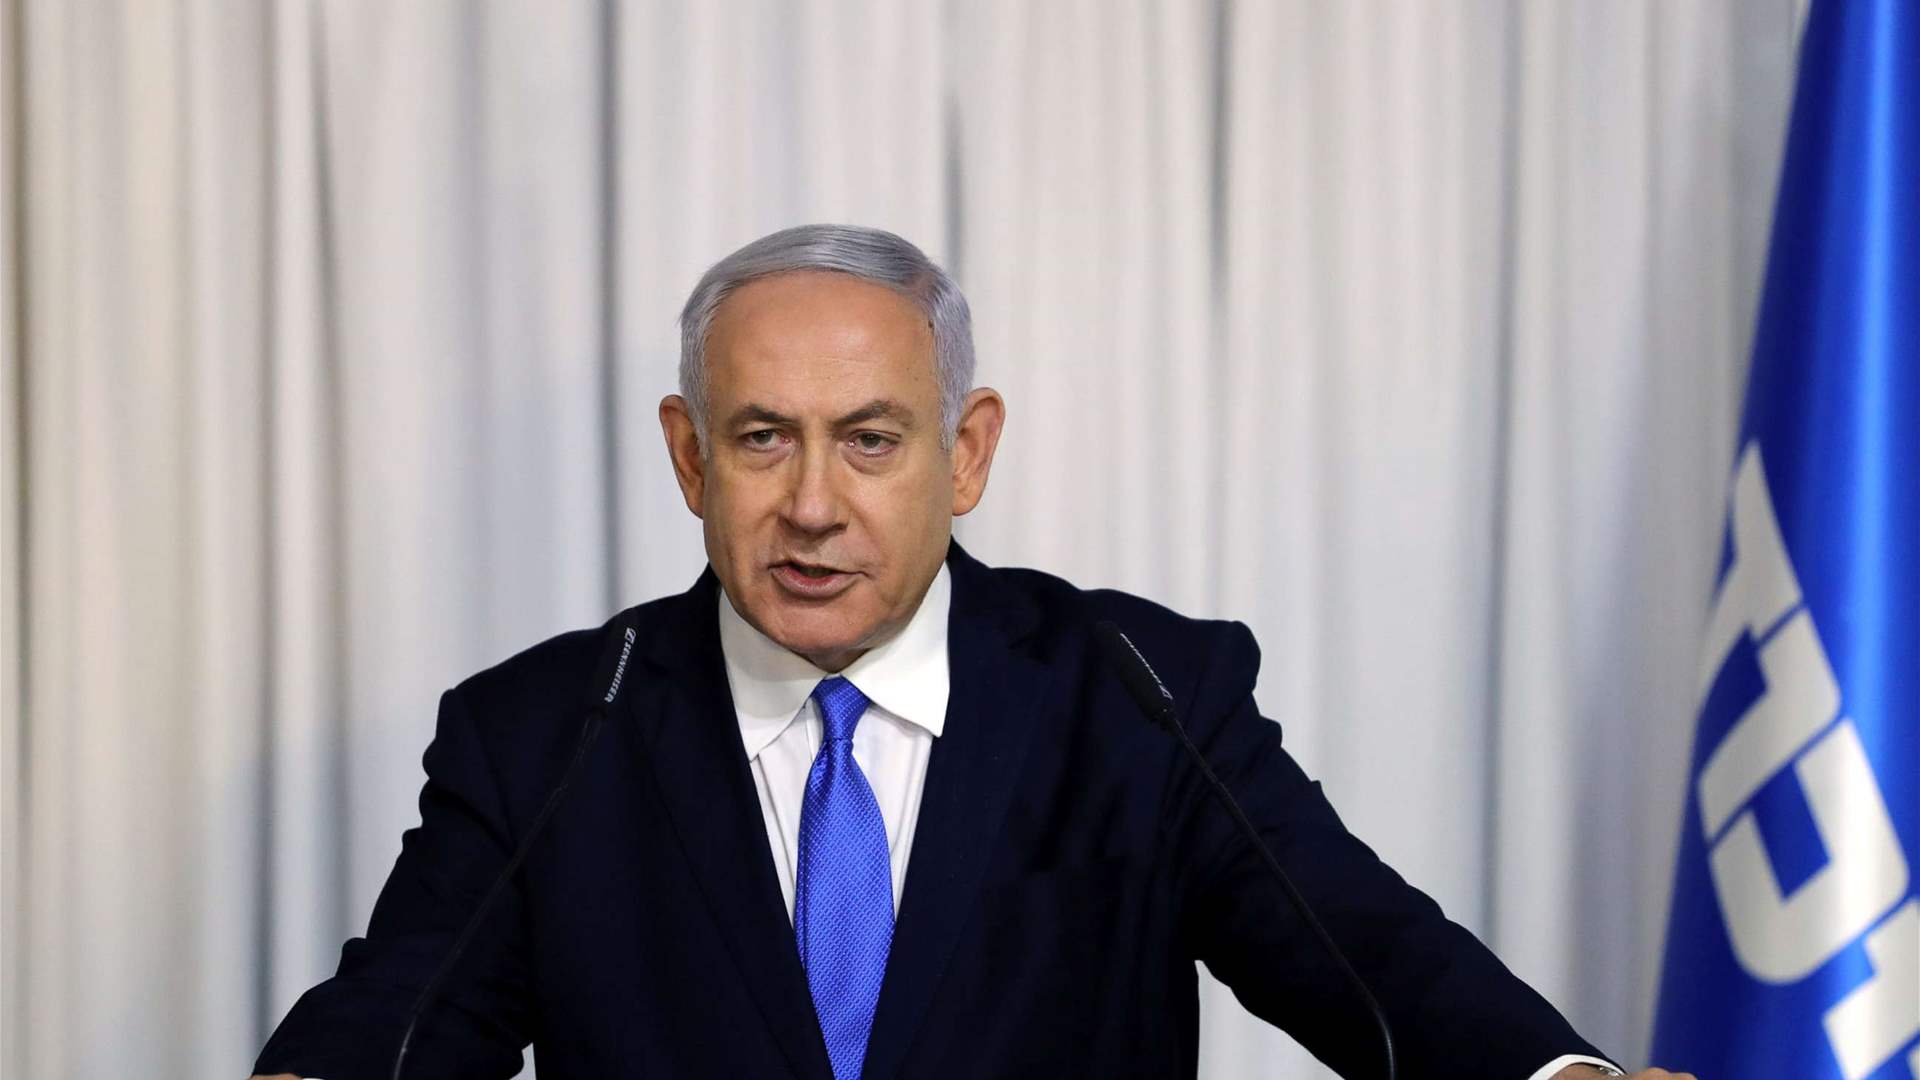 Netanyahu: No Gaza truce without release of hostages